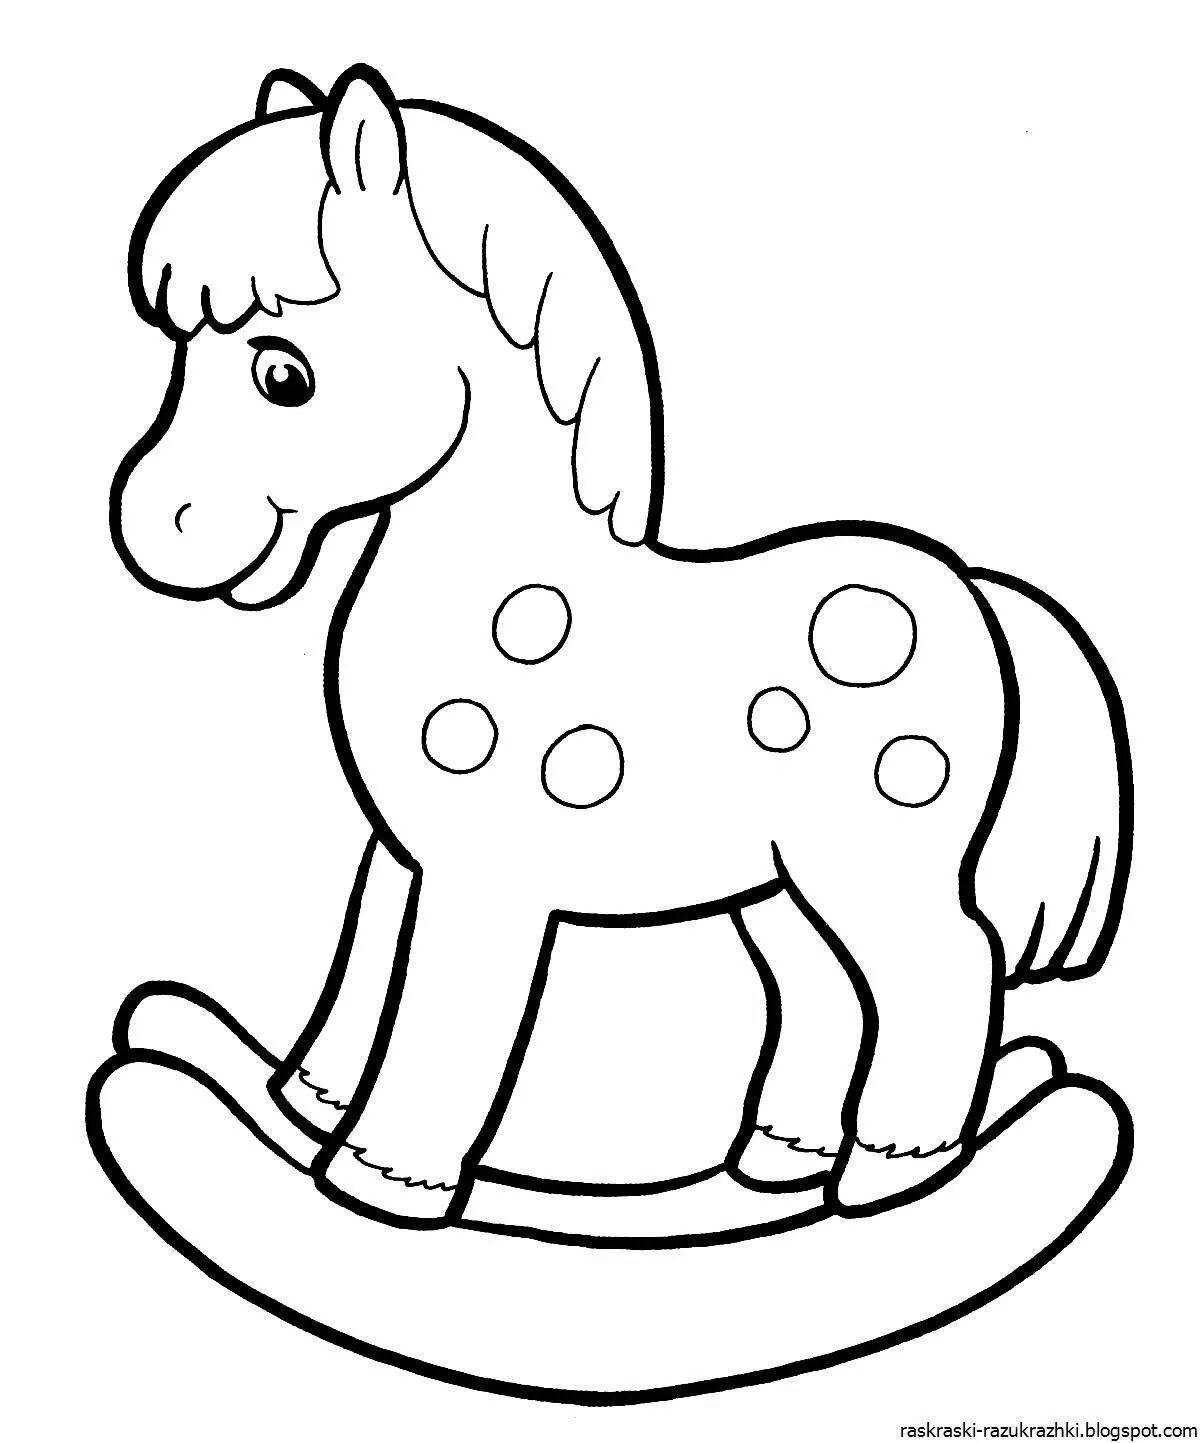 Colourful coloring horse for children 2-3 years old